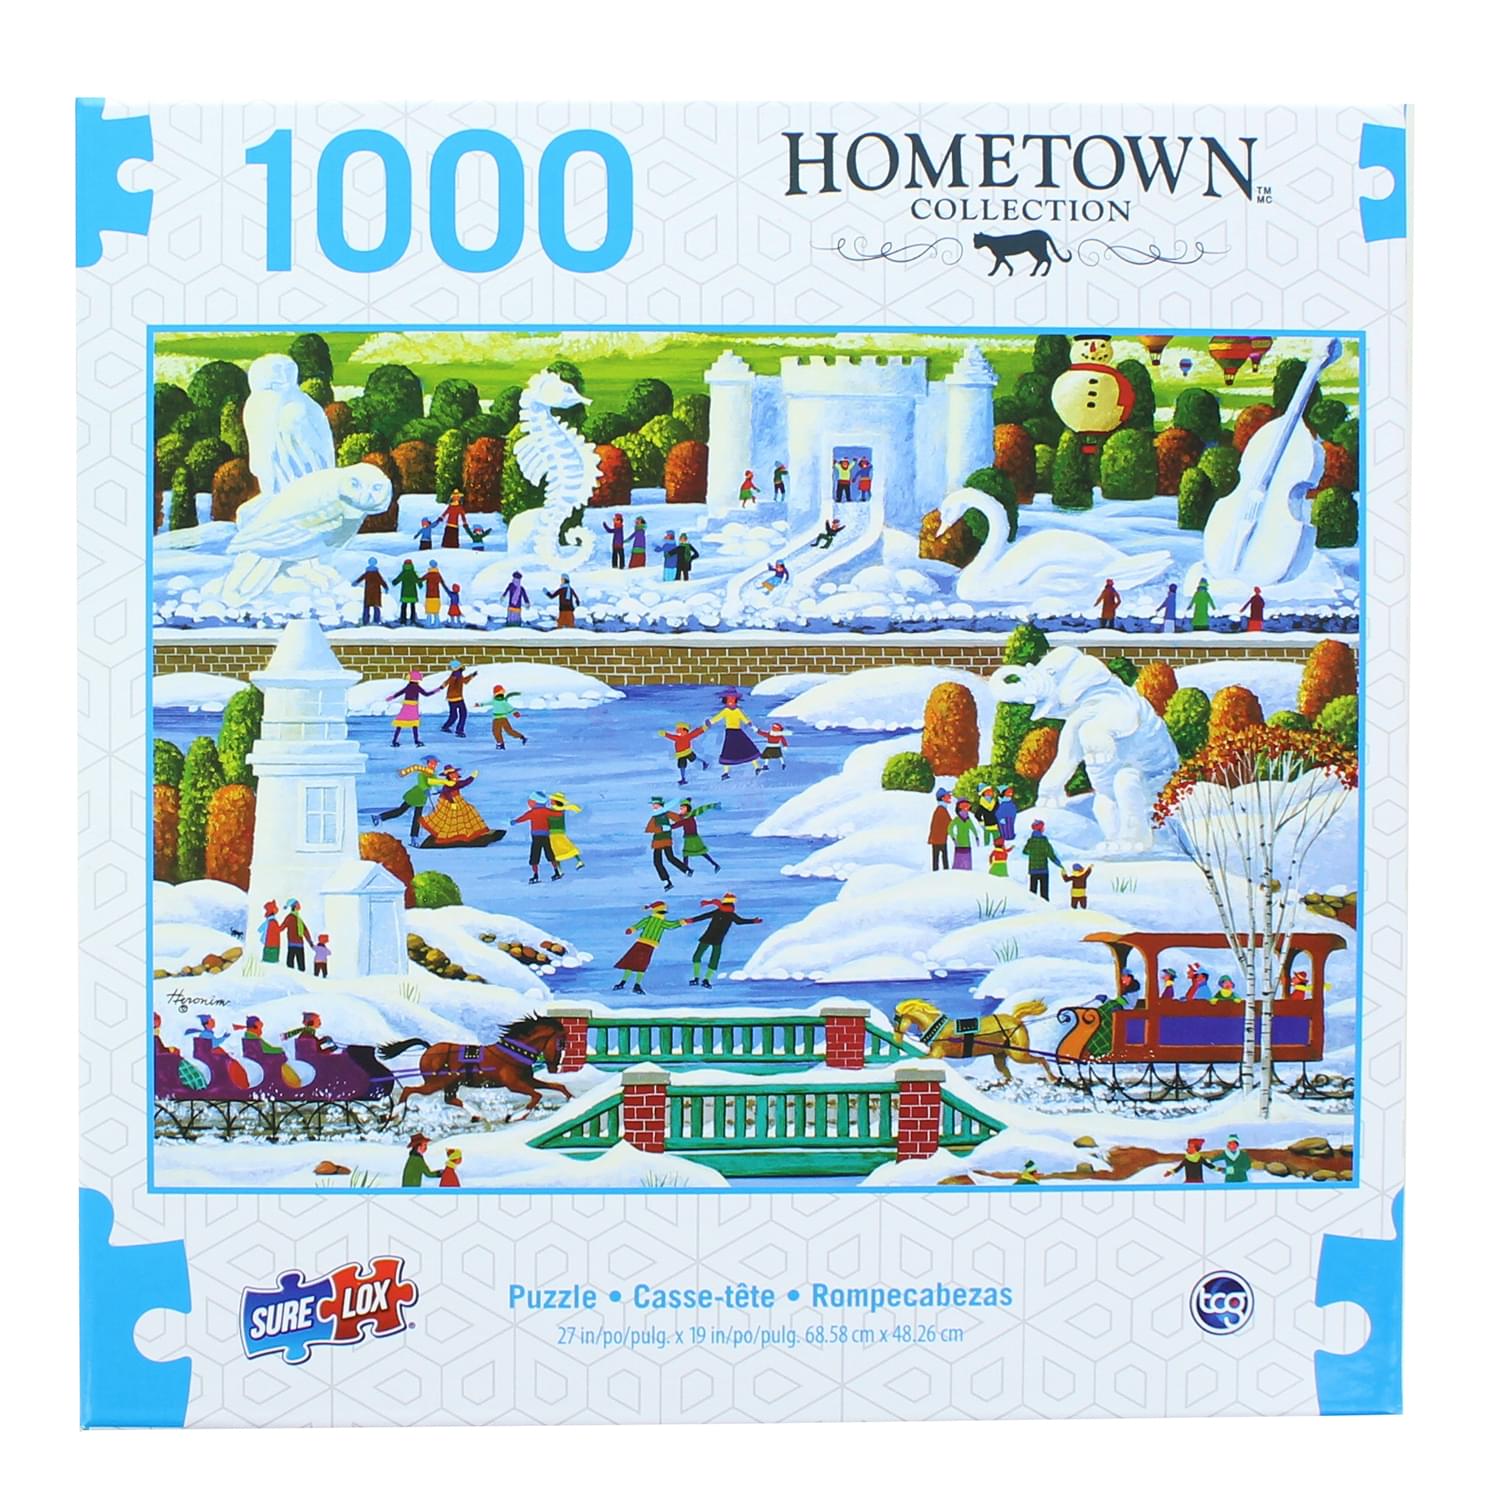 Hometown Collection 1000 Piece Jigsaw Puzzle , Wisconsin Snow Sculptures